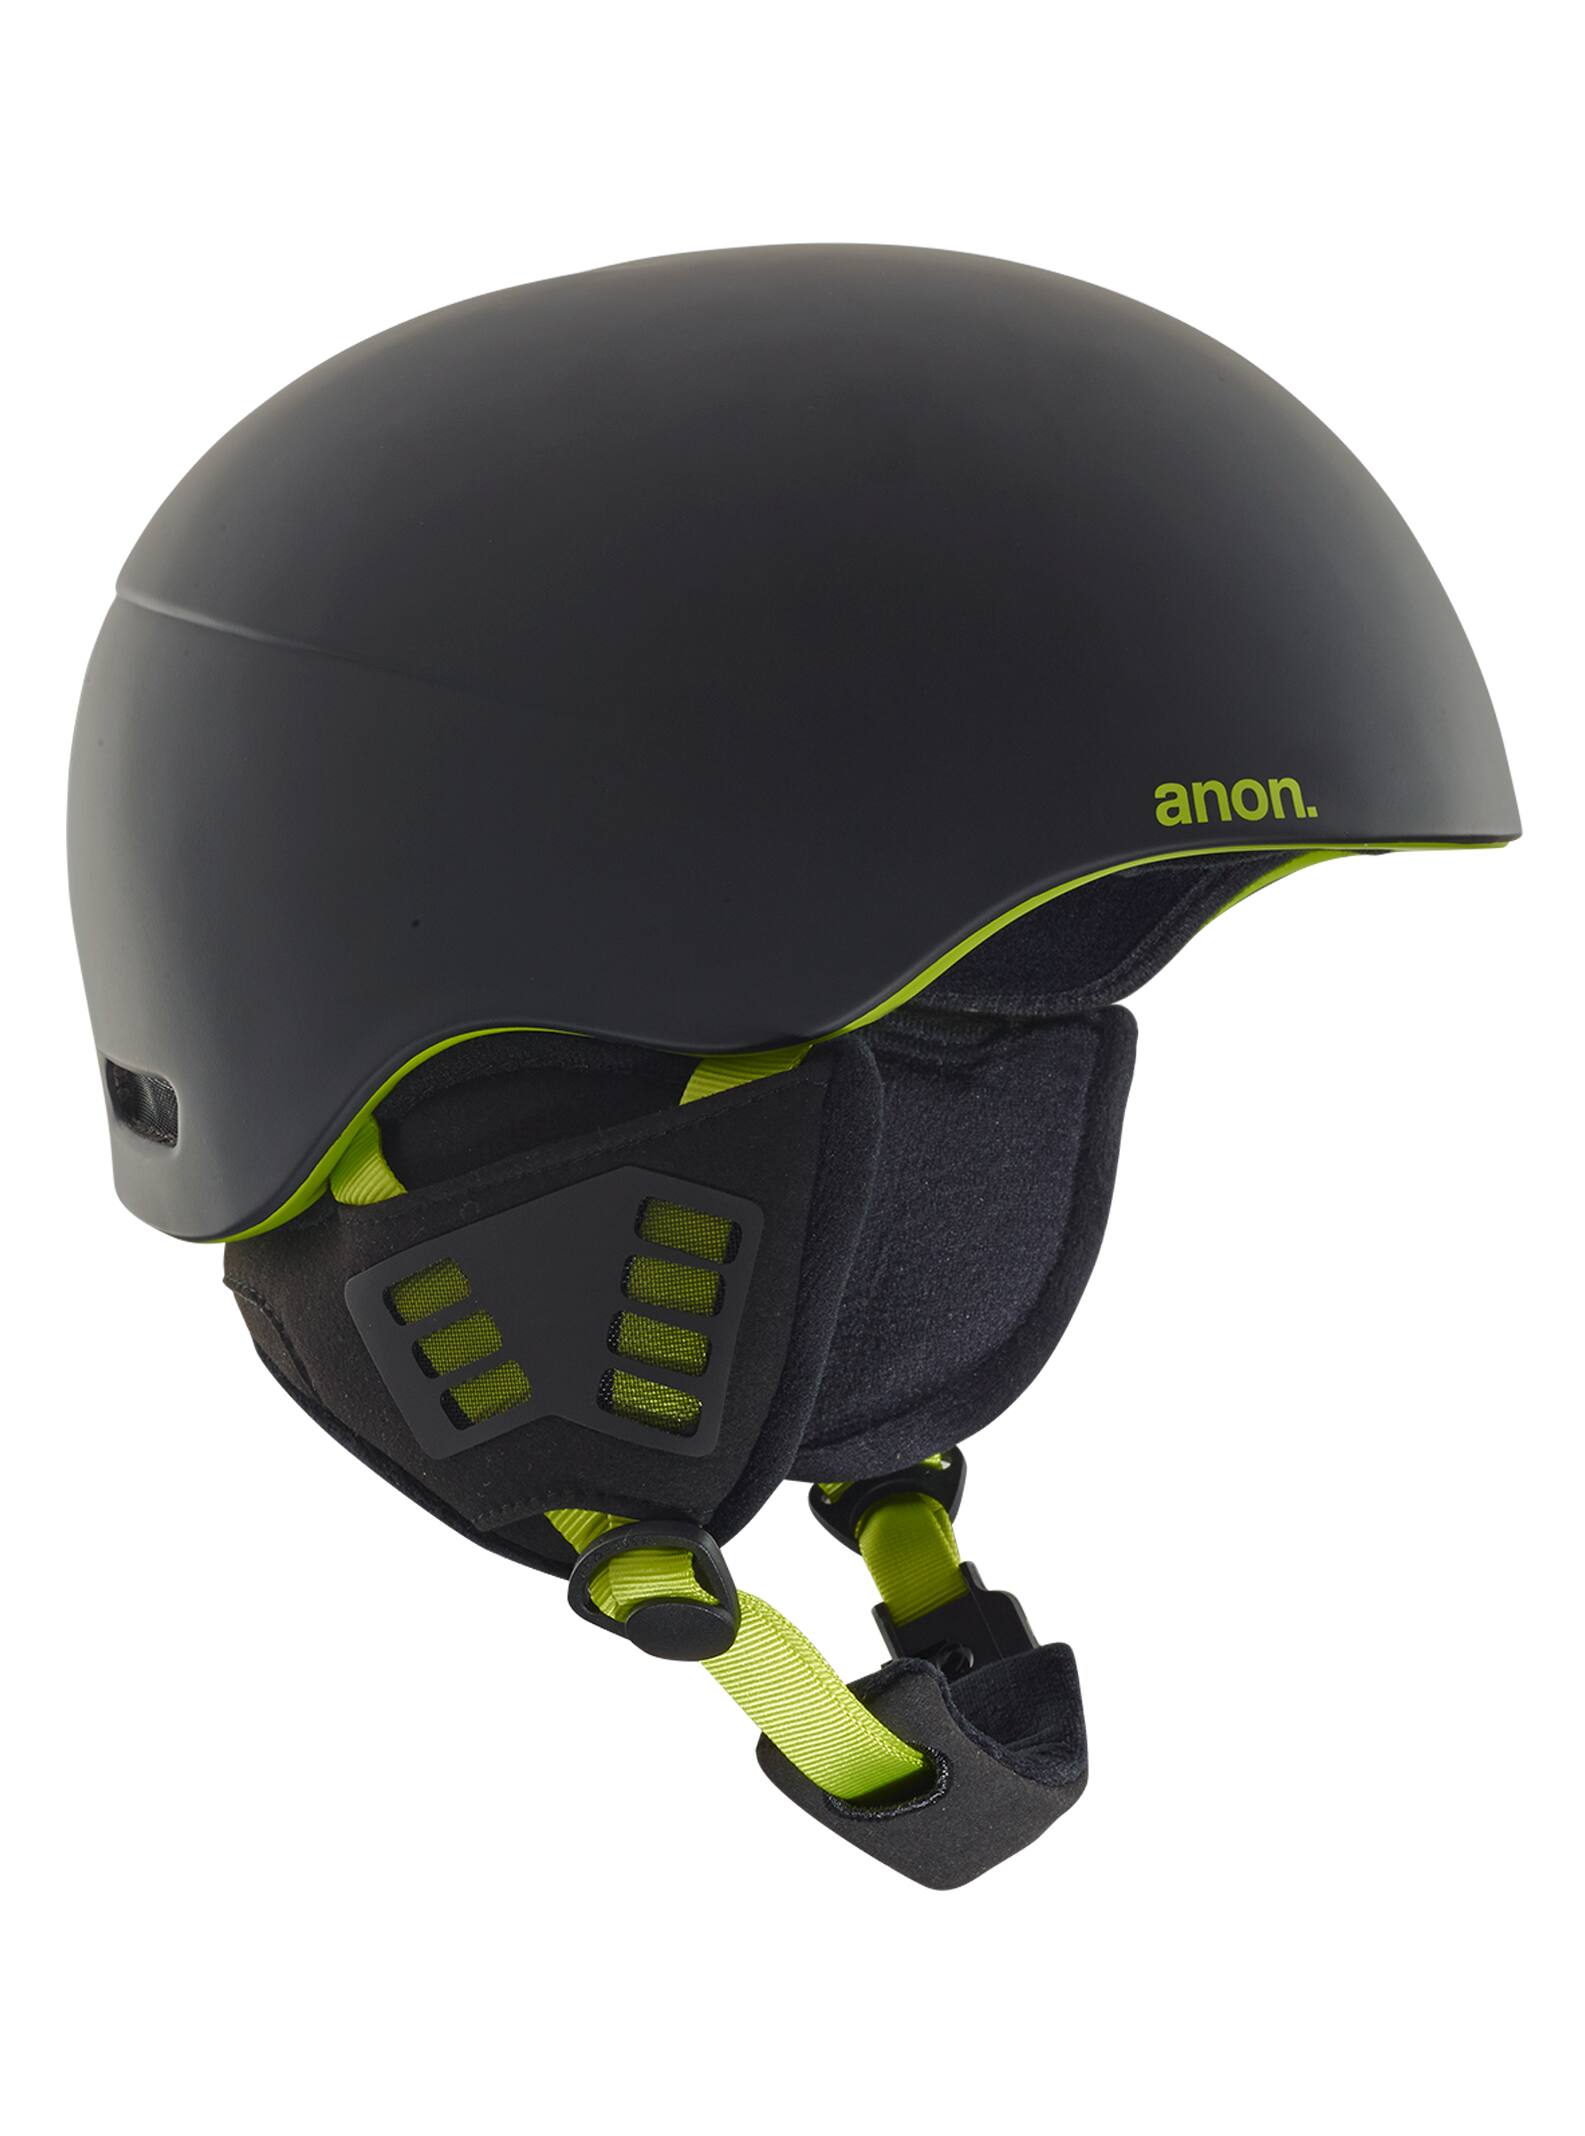 Anon - Casque Helo 2,0 homme, Black / Green, L